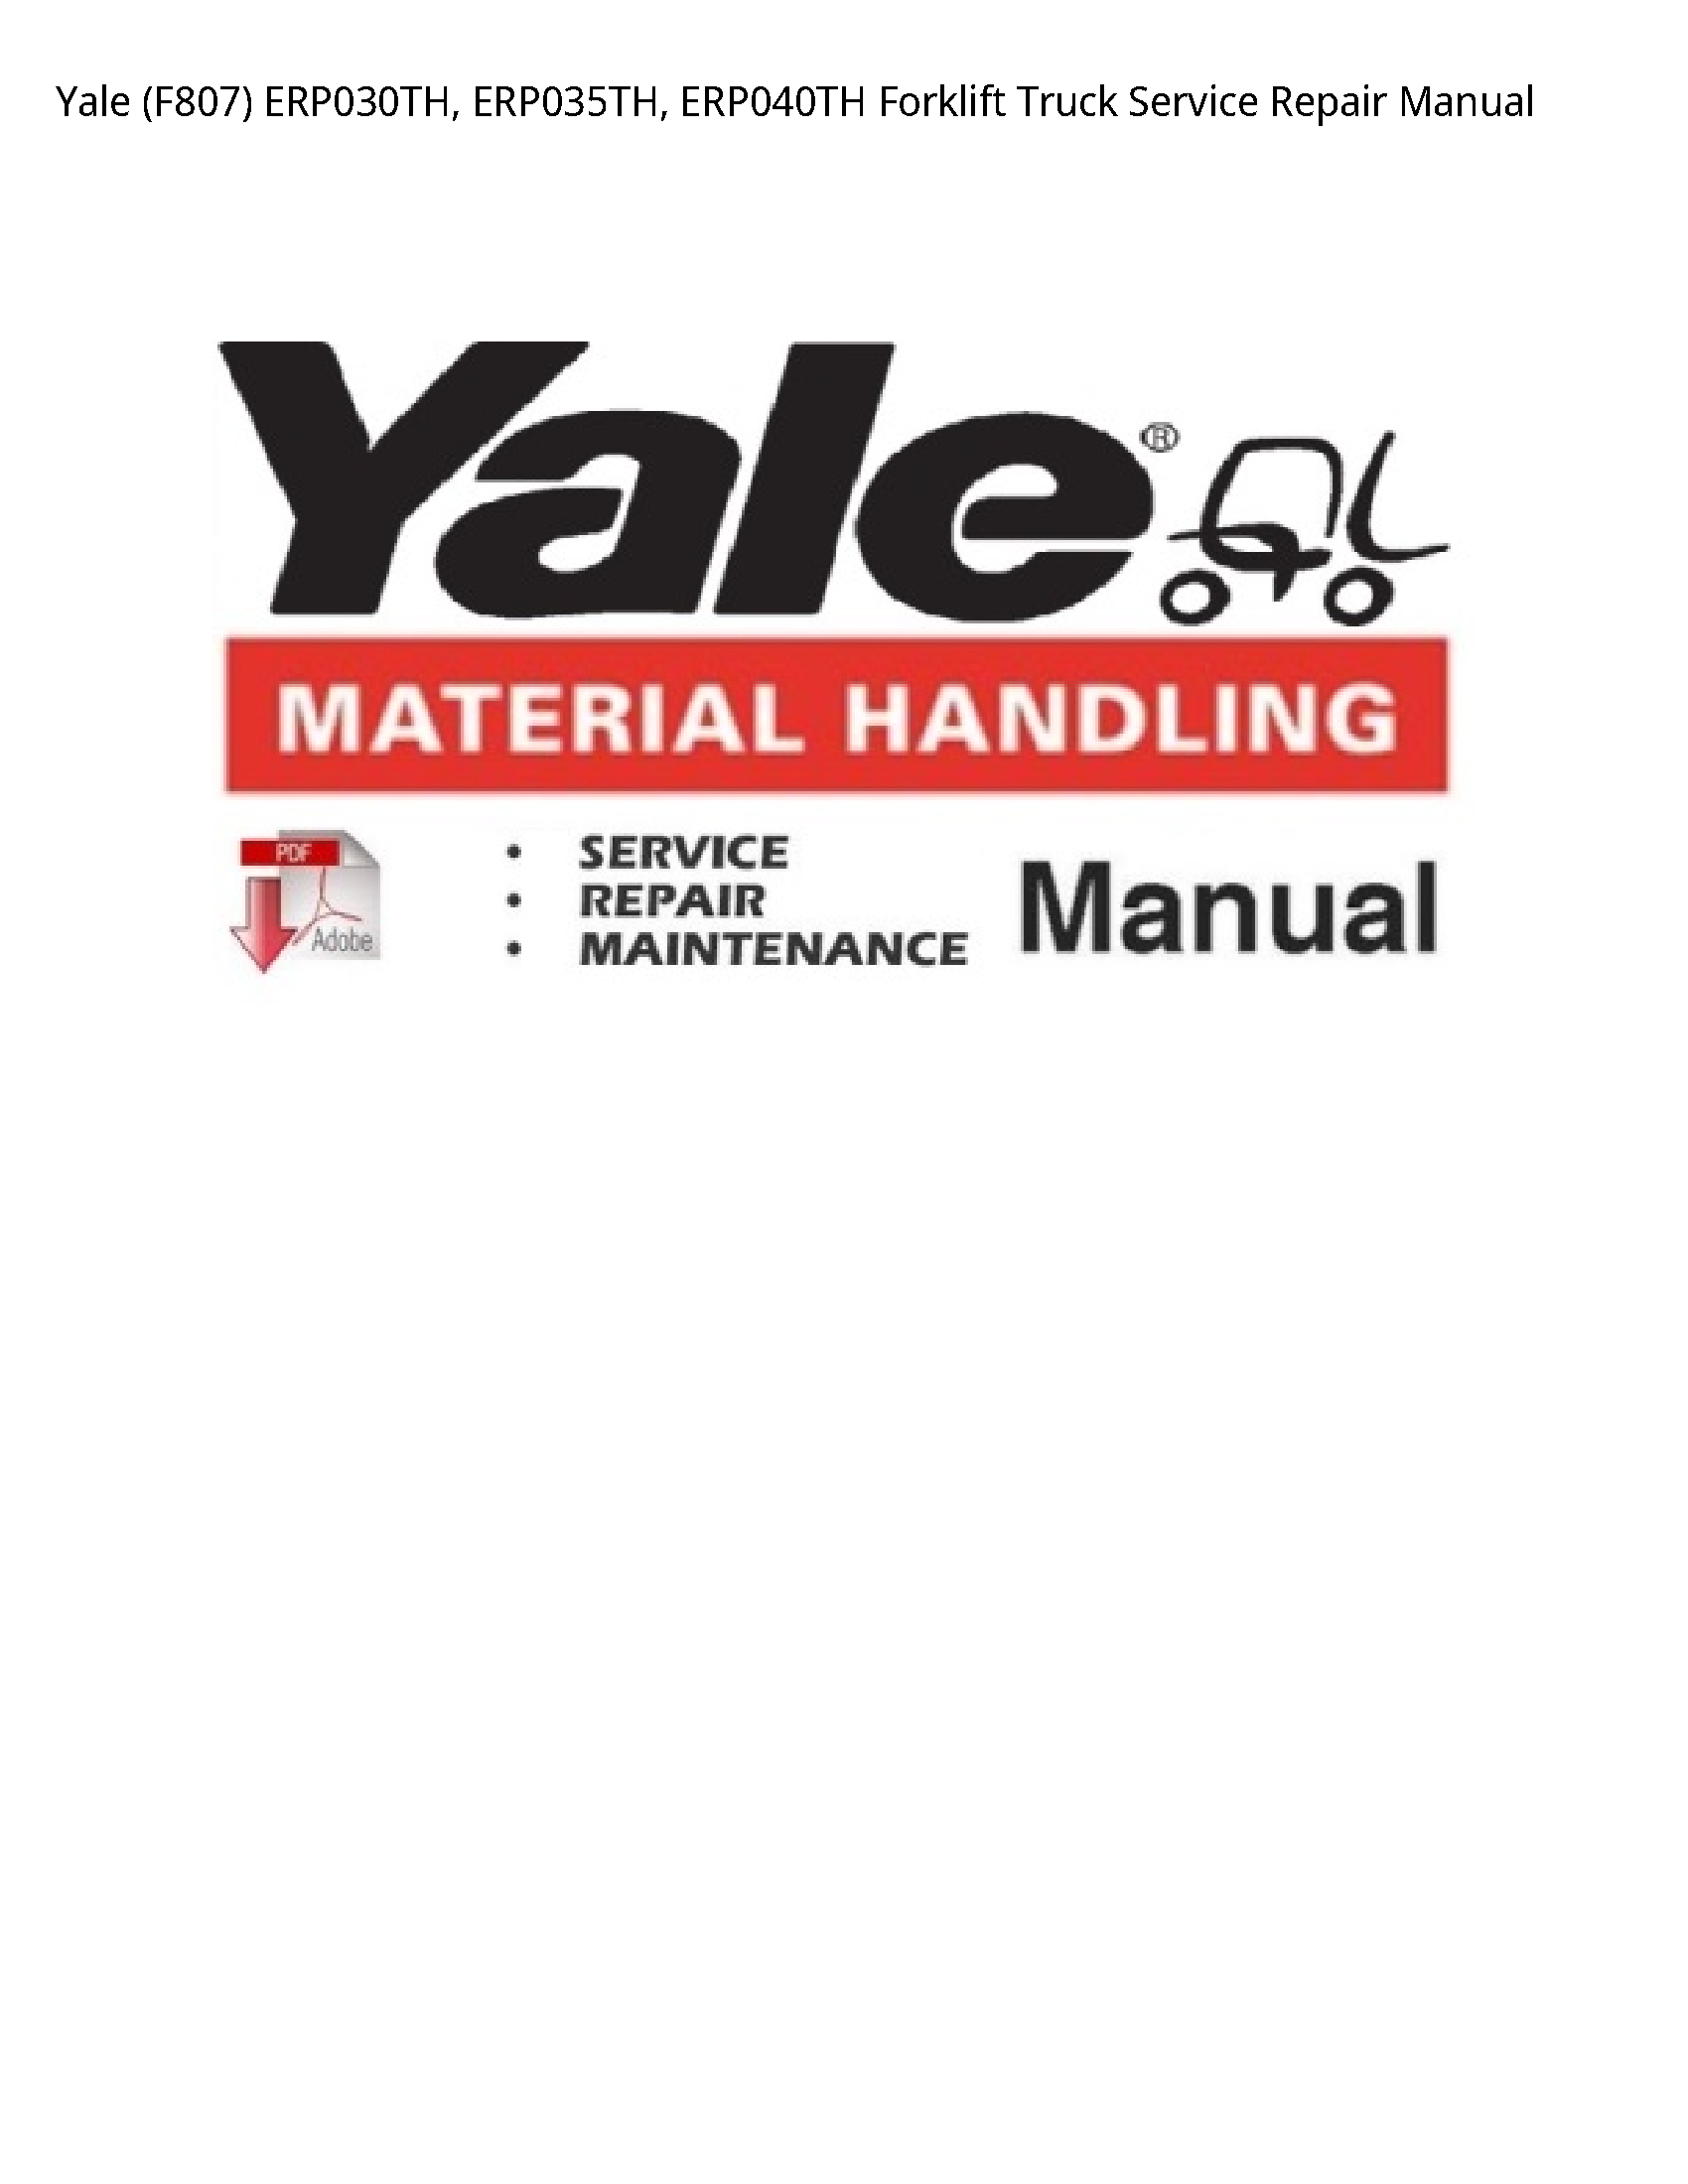 Yale (F807) Forklift Truck manual